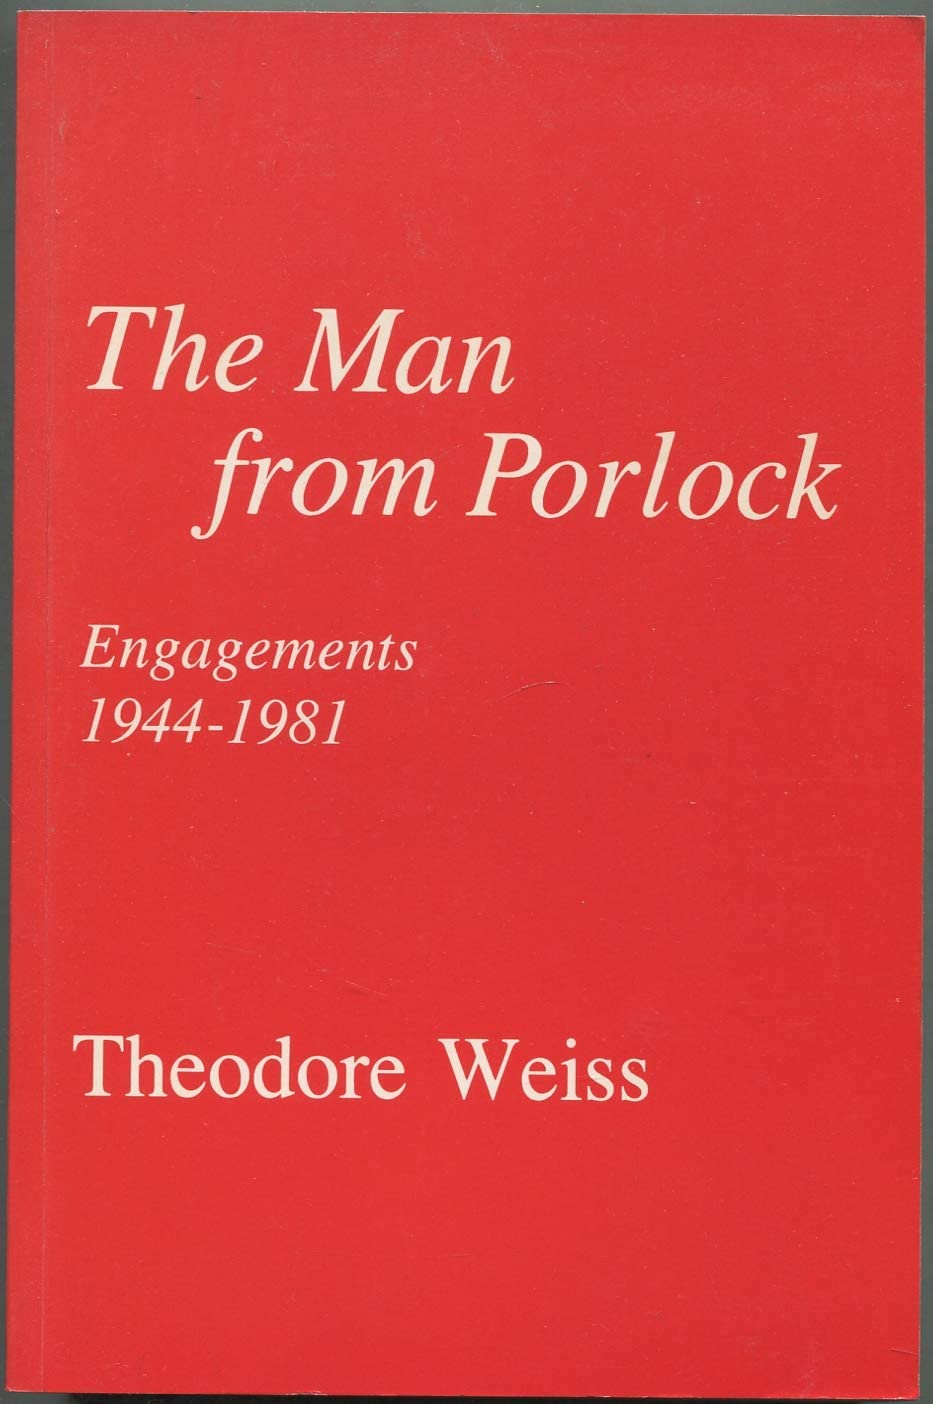 The Man from Porlock: Engagements, 1944-1981 (Princeton Series of Collected Essays)